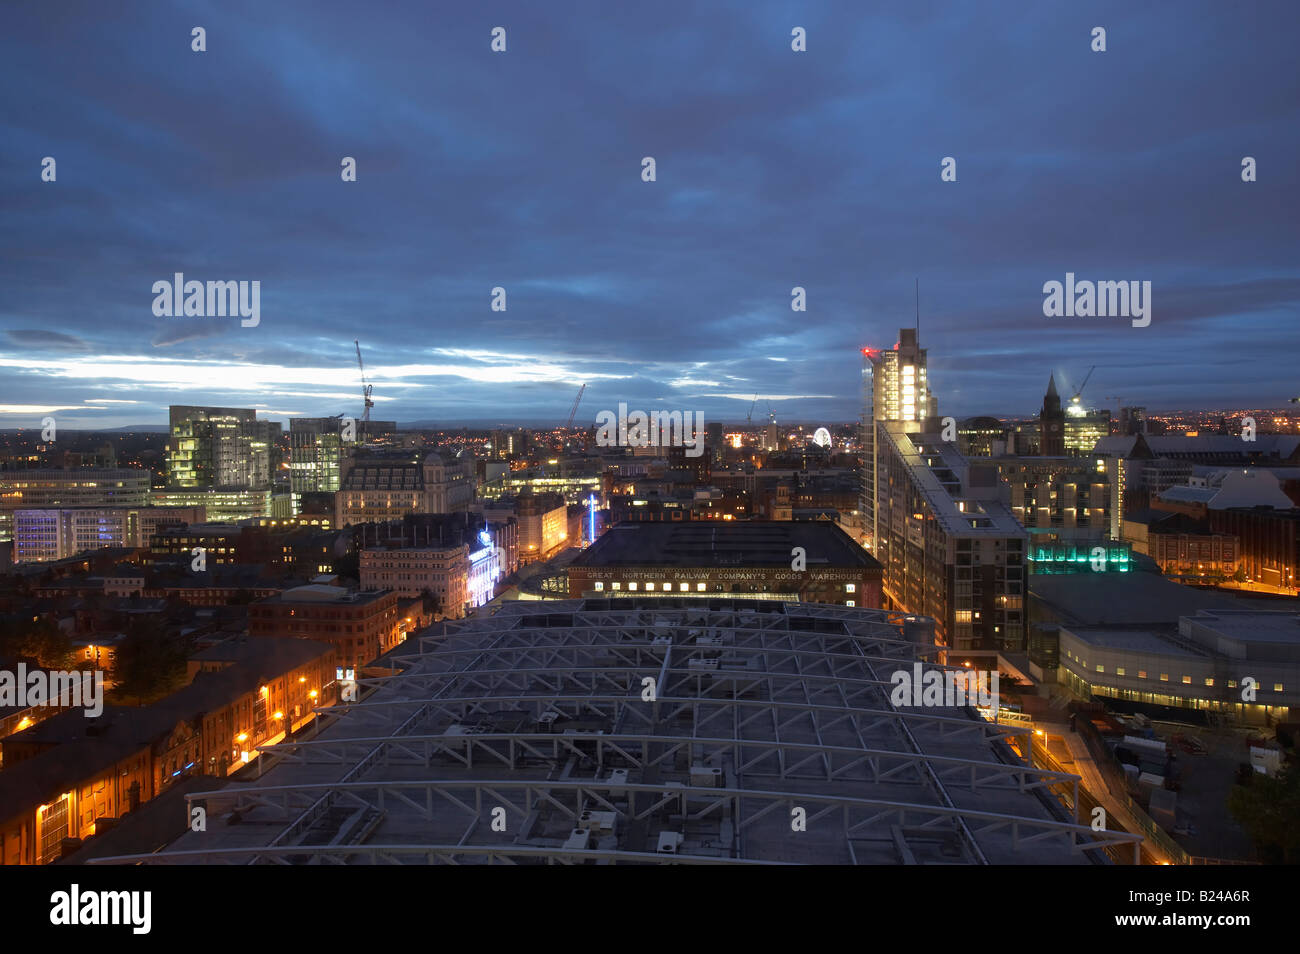 MANCHESTER SKYLINE NOTTE HILTON HOTEL BEETHAM TOWER DEANSGATE Foto Stock